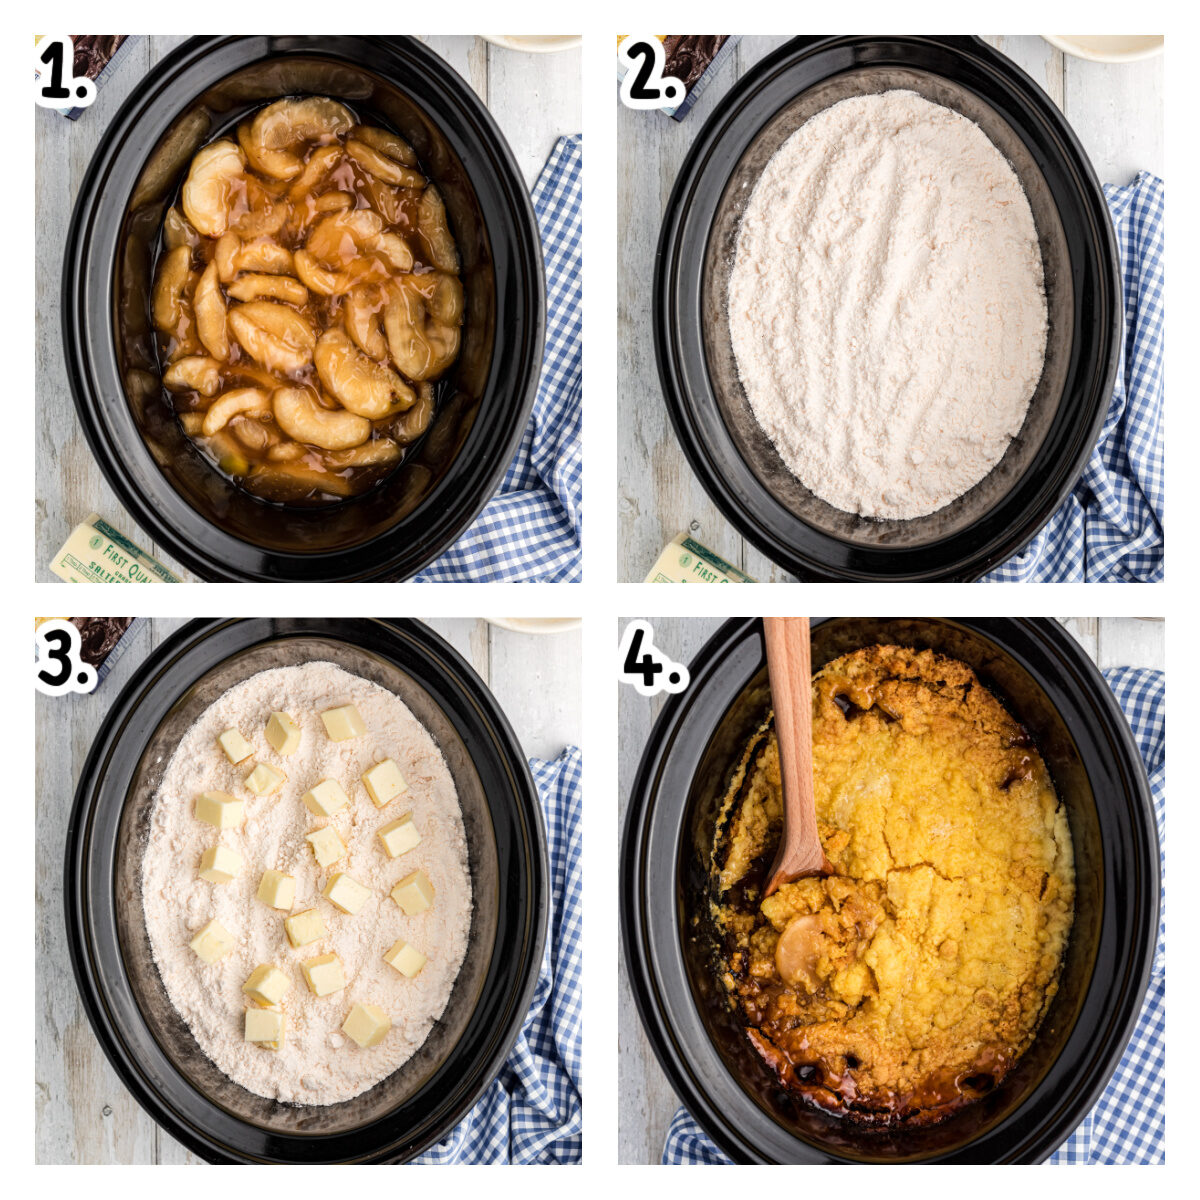 Four images showing how to make apple dump cake in a slow cooker.